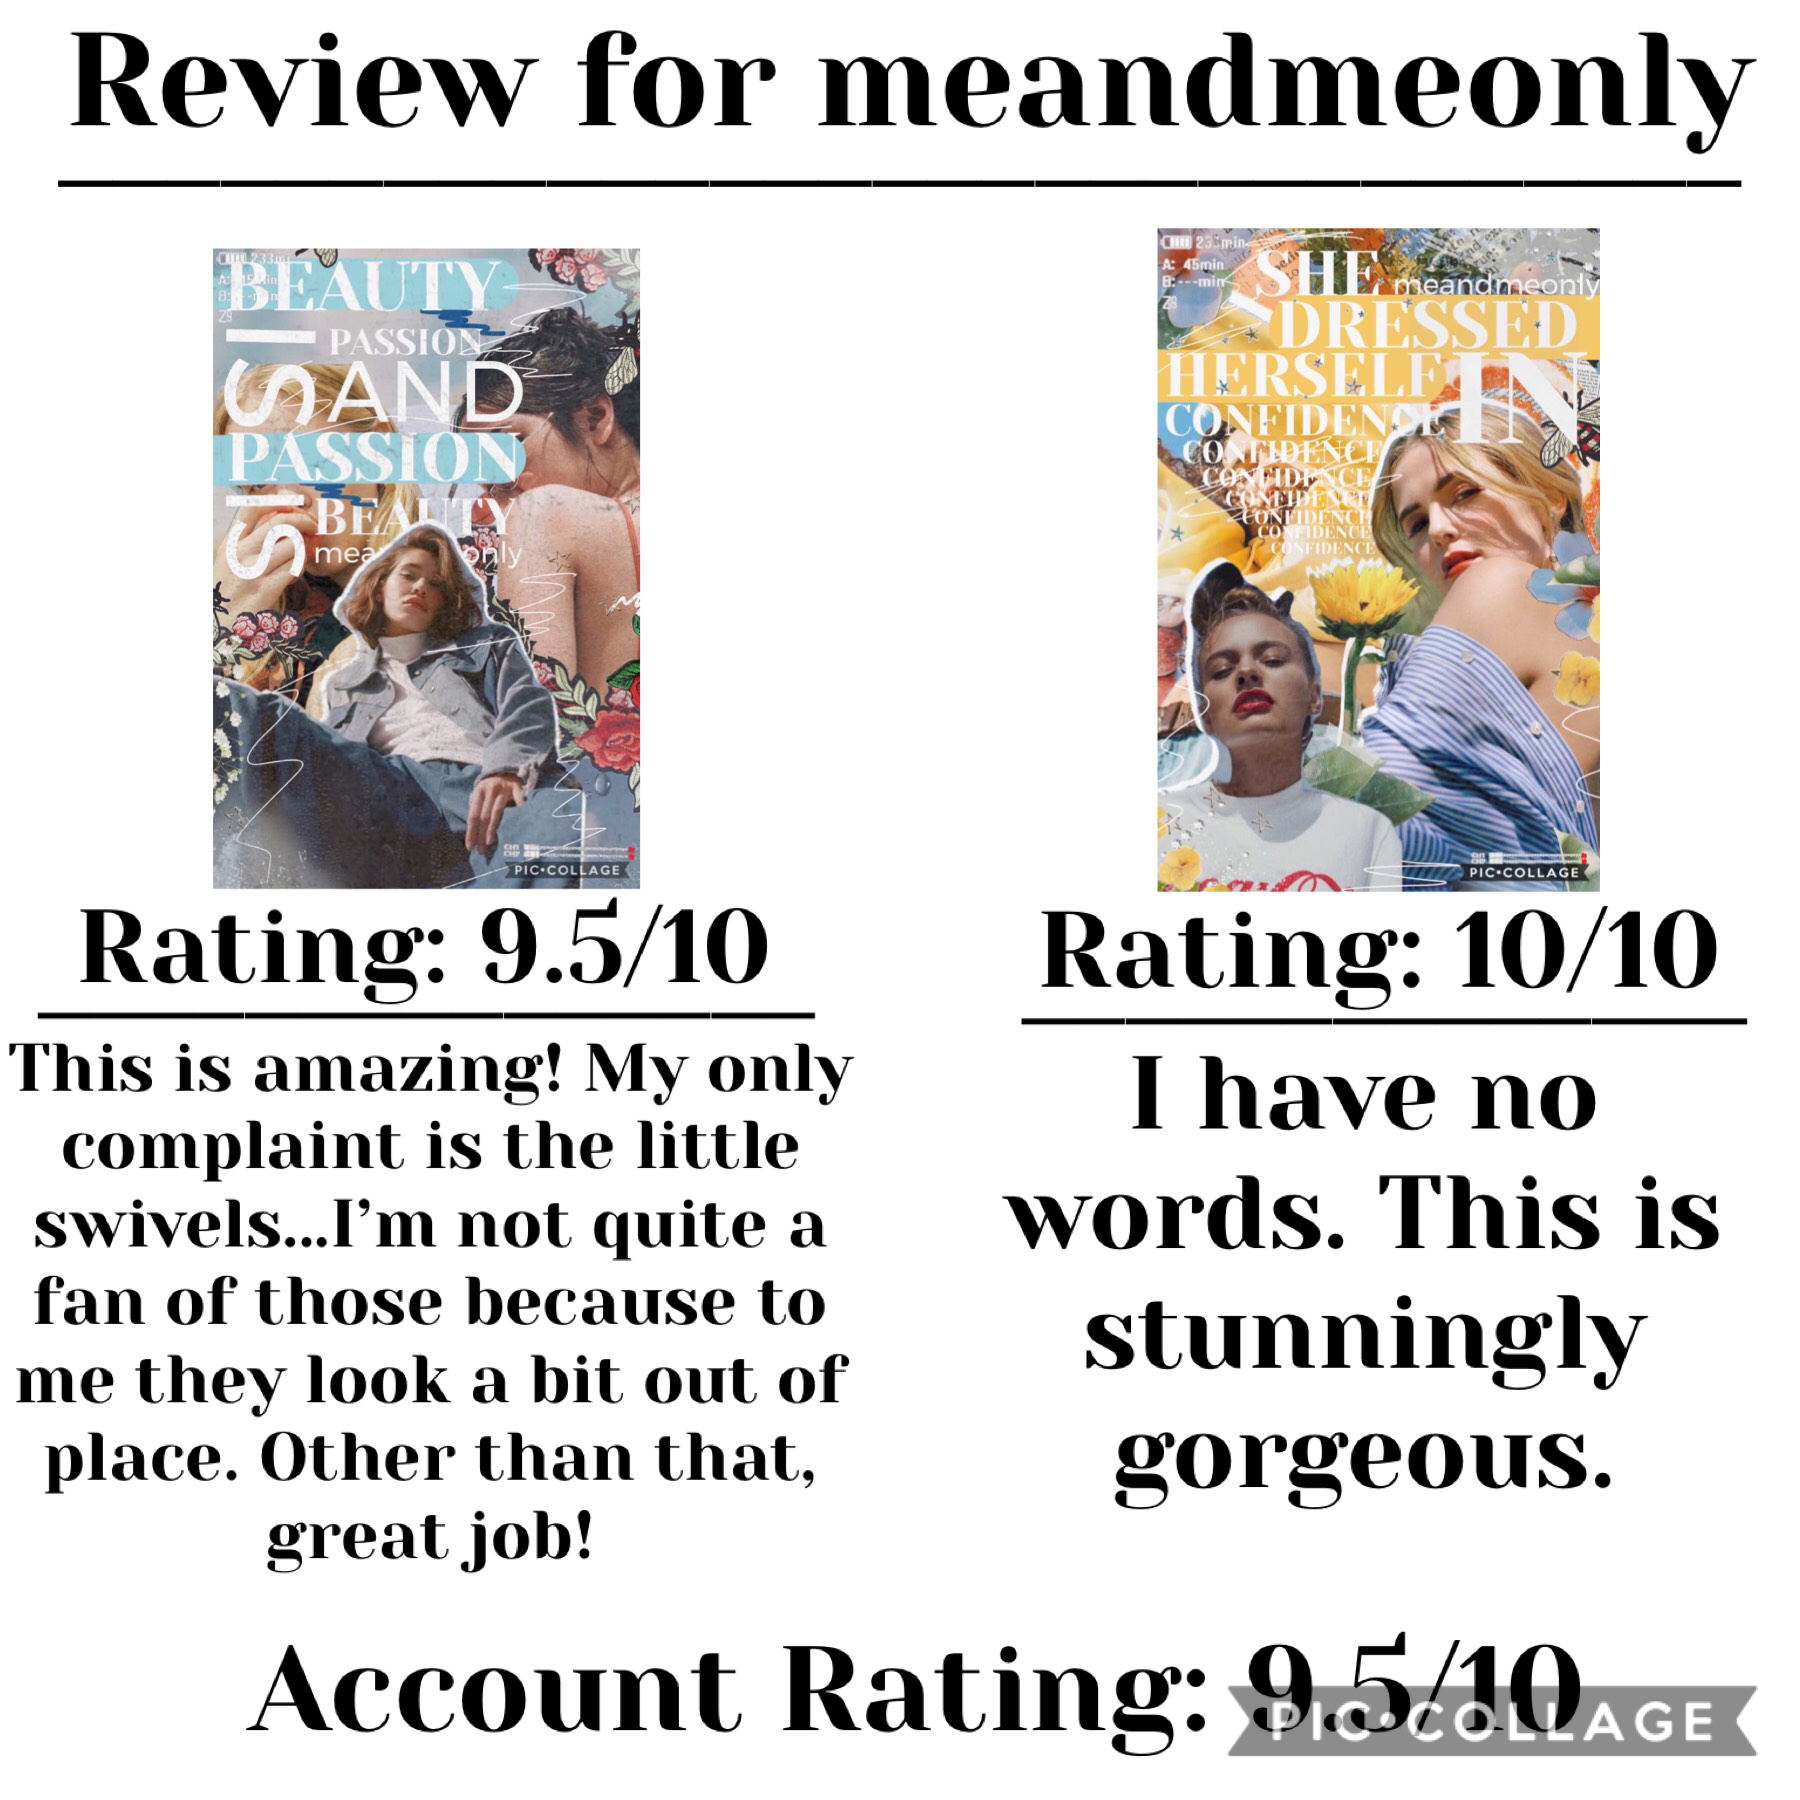 Review for meandmeonly 💘💘 awesome job girl!! 👏🏻👏🏻🤩🤩